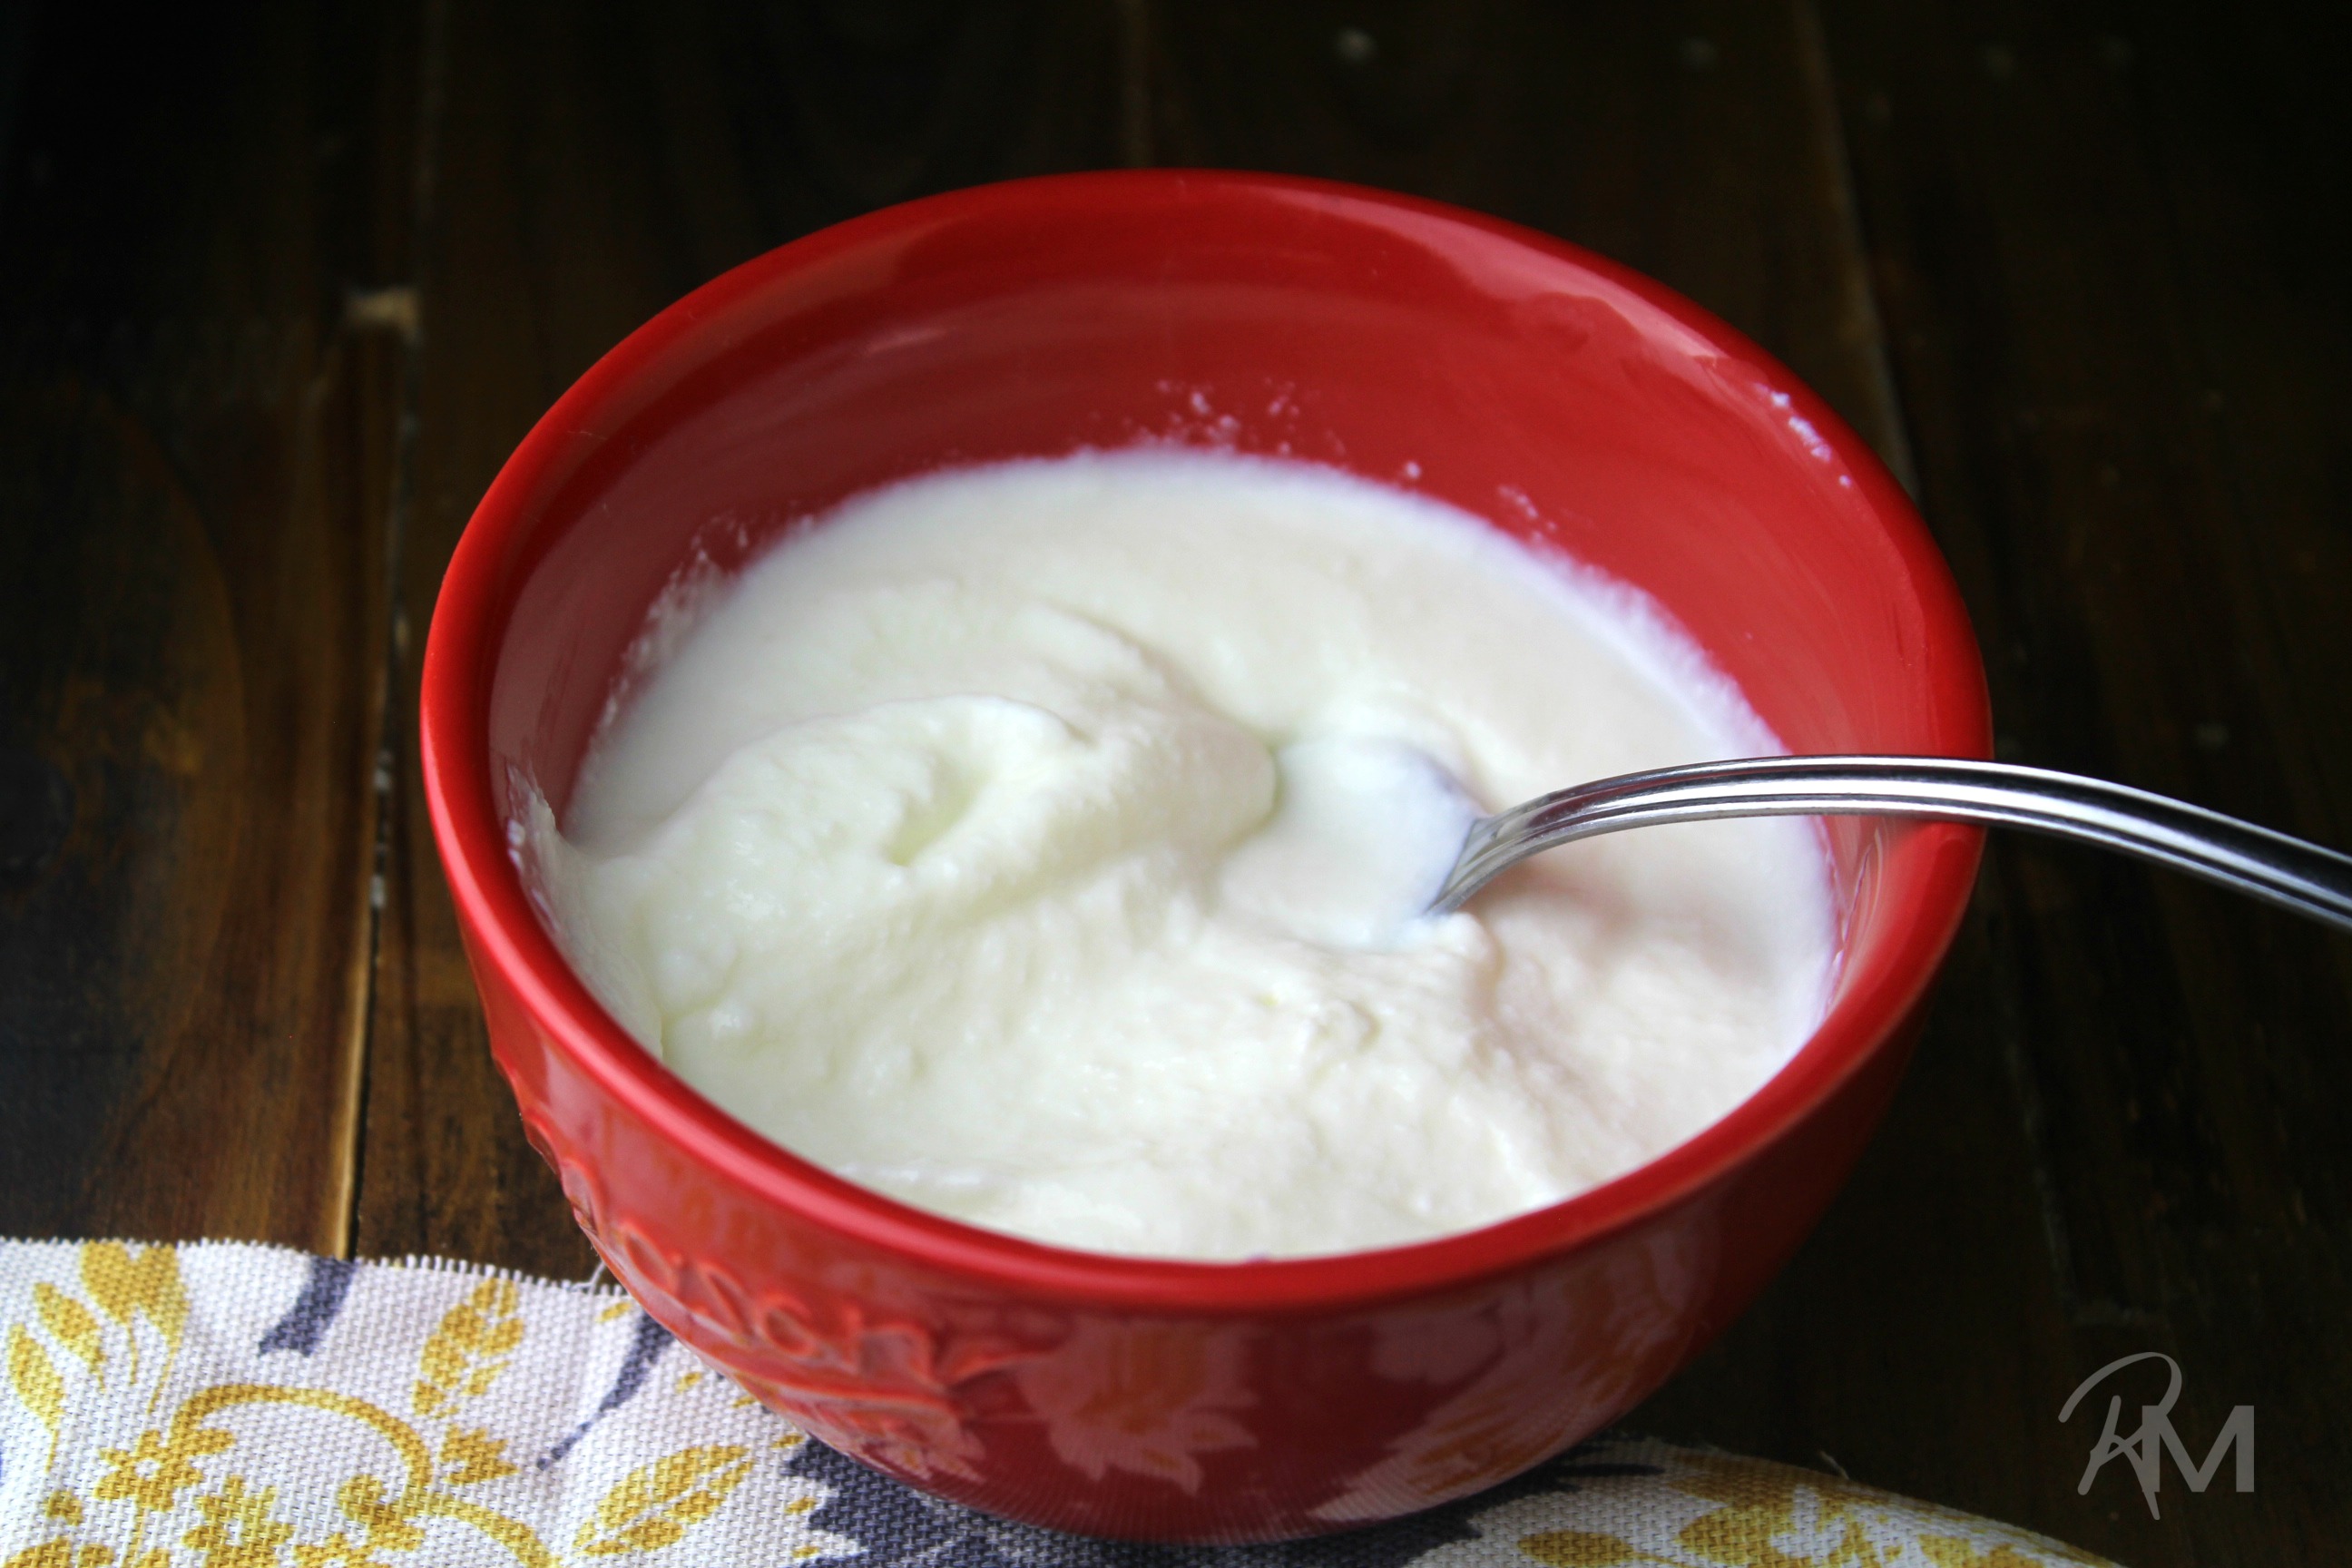 Basic kefir sour cream is rich in flavor & probiotics - a great alternative to store-bought sour cream! It’s easy to make with 2 simple ingredients.